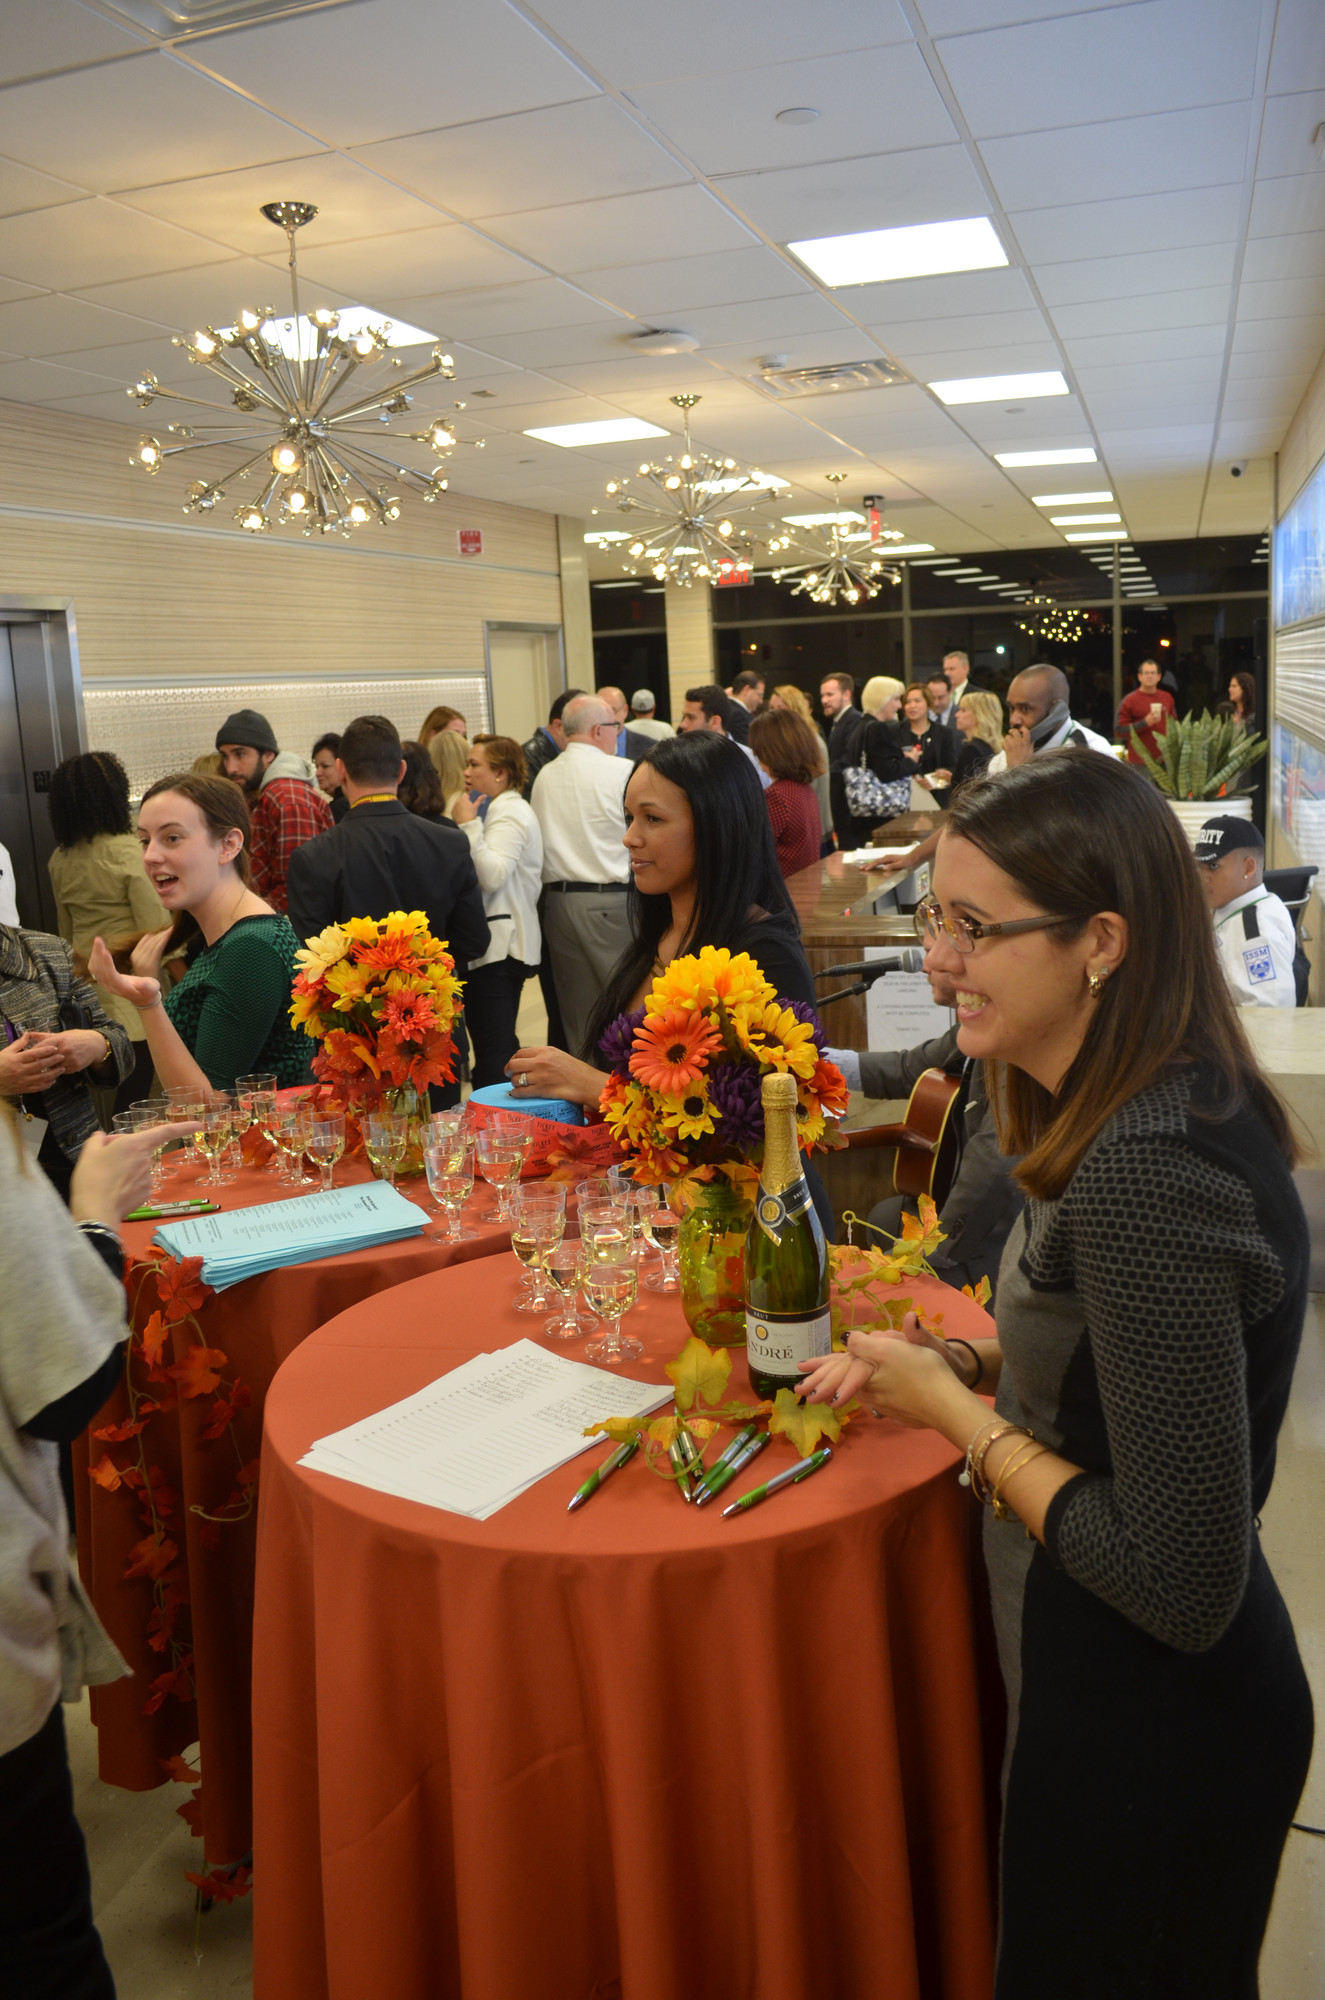 A reception complete with dinner, dancing, refreshments, psychic medium readings and a Chinese auction to benefit the Long Beach Christmas Angel was held as part of the Komanoff Center’s Grand Opening.